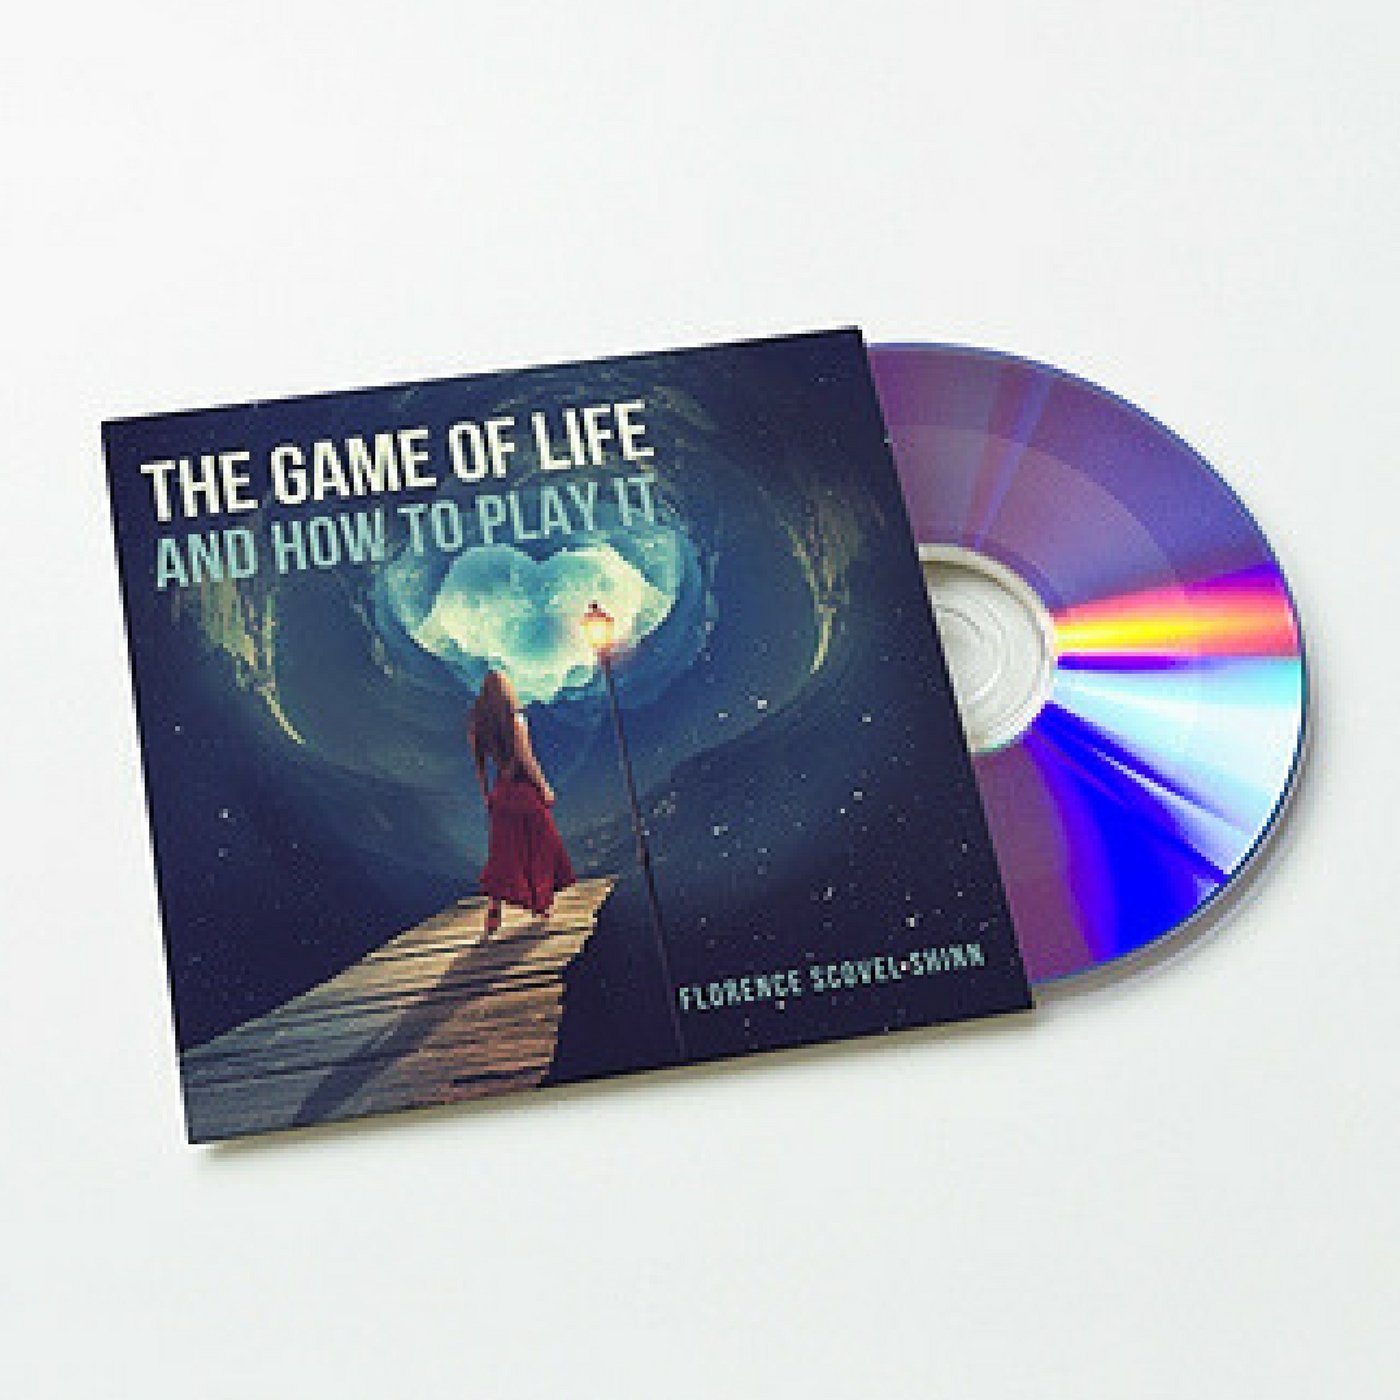 The Game of Life and How to Play It (Audiobook)